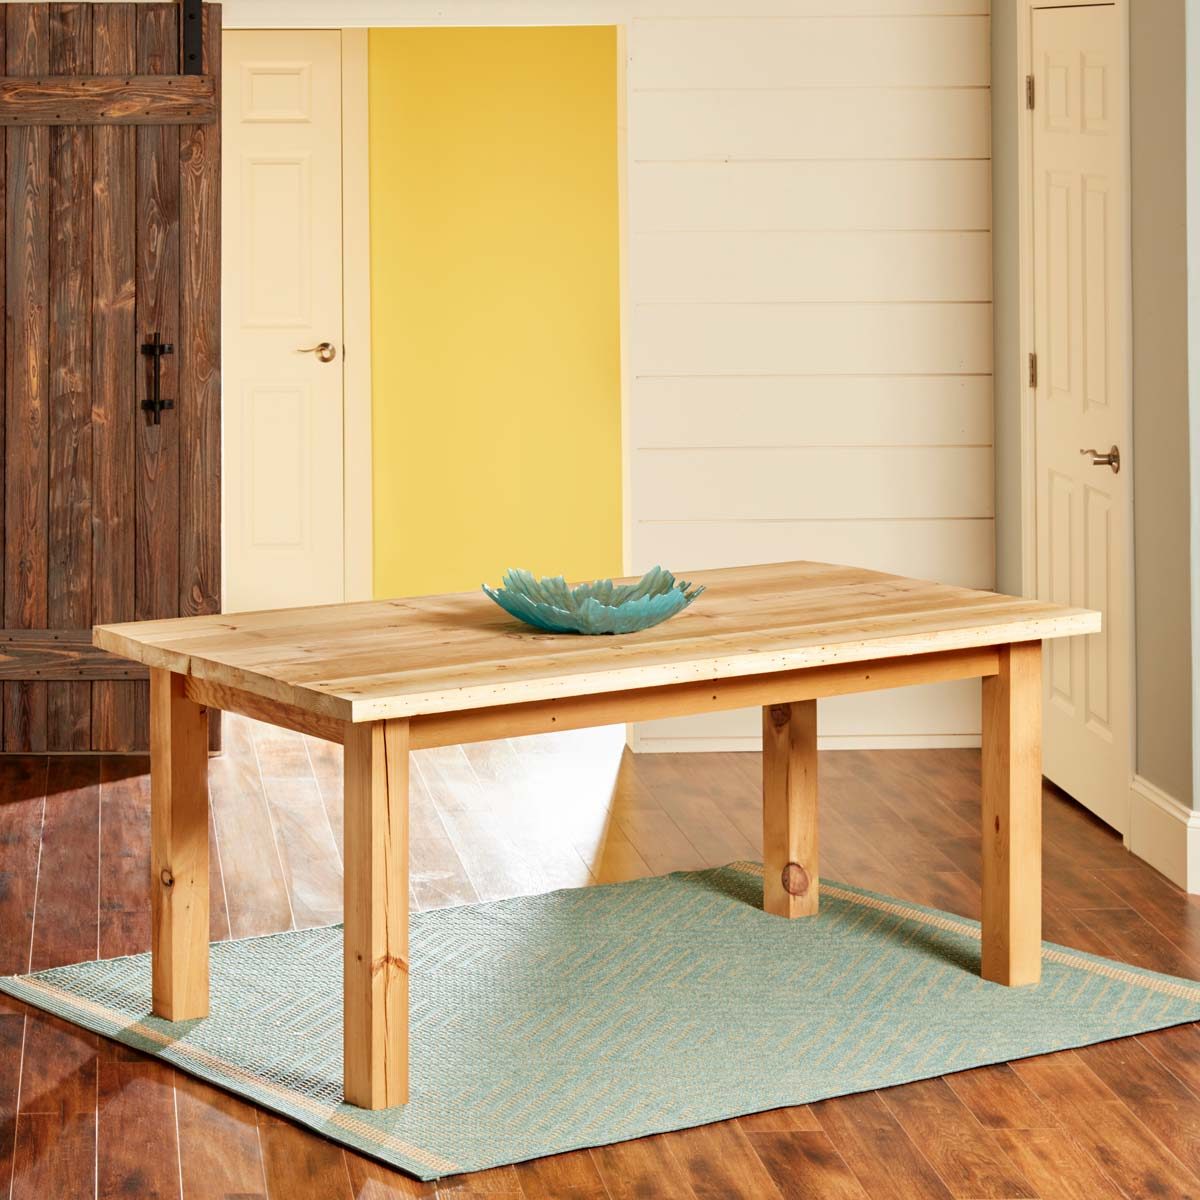 Build a Simple Reclaimed Wood Table